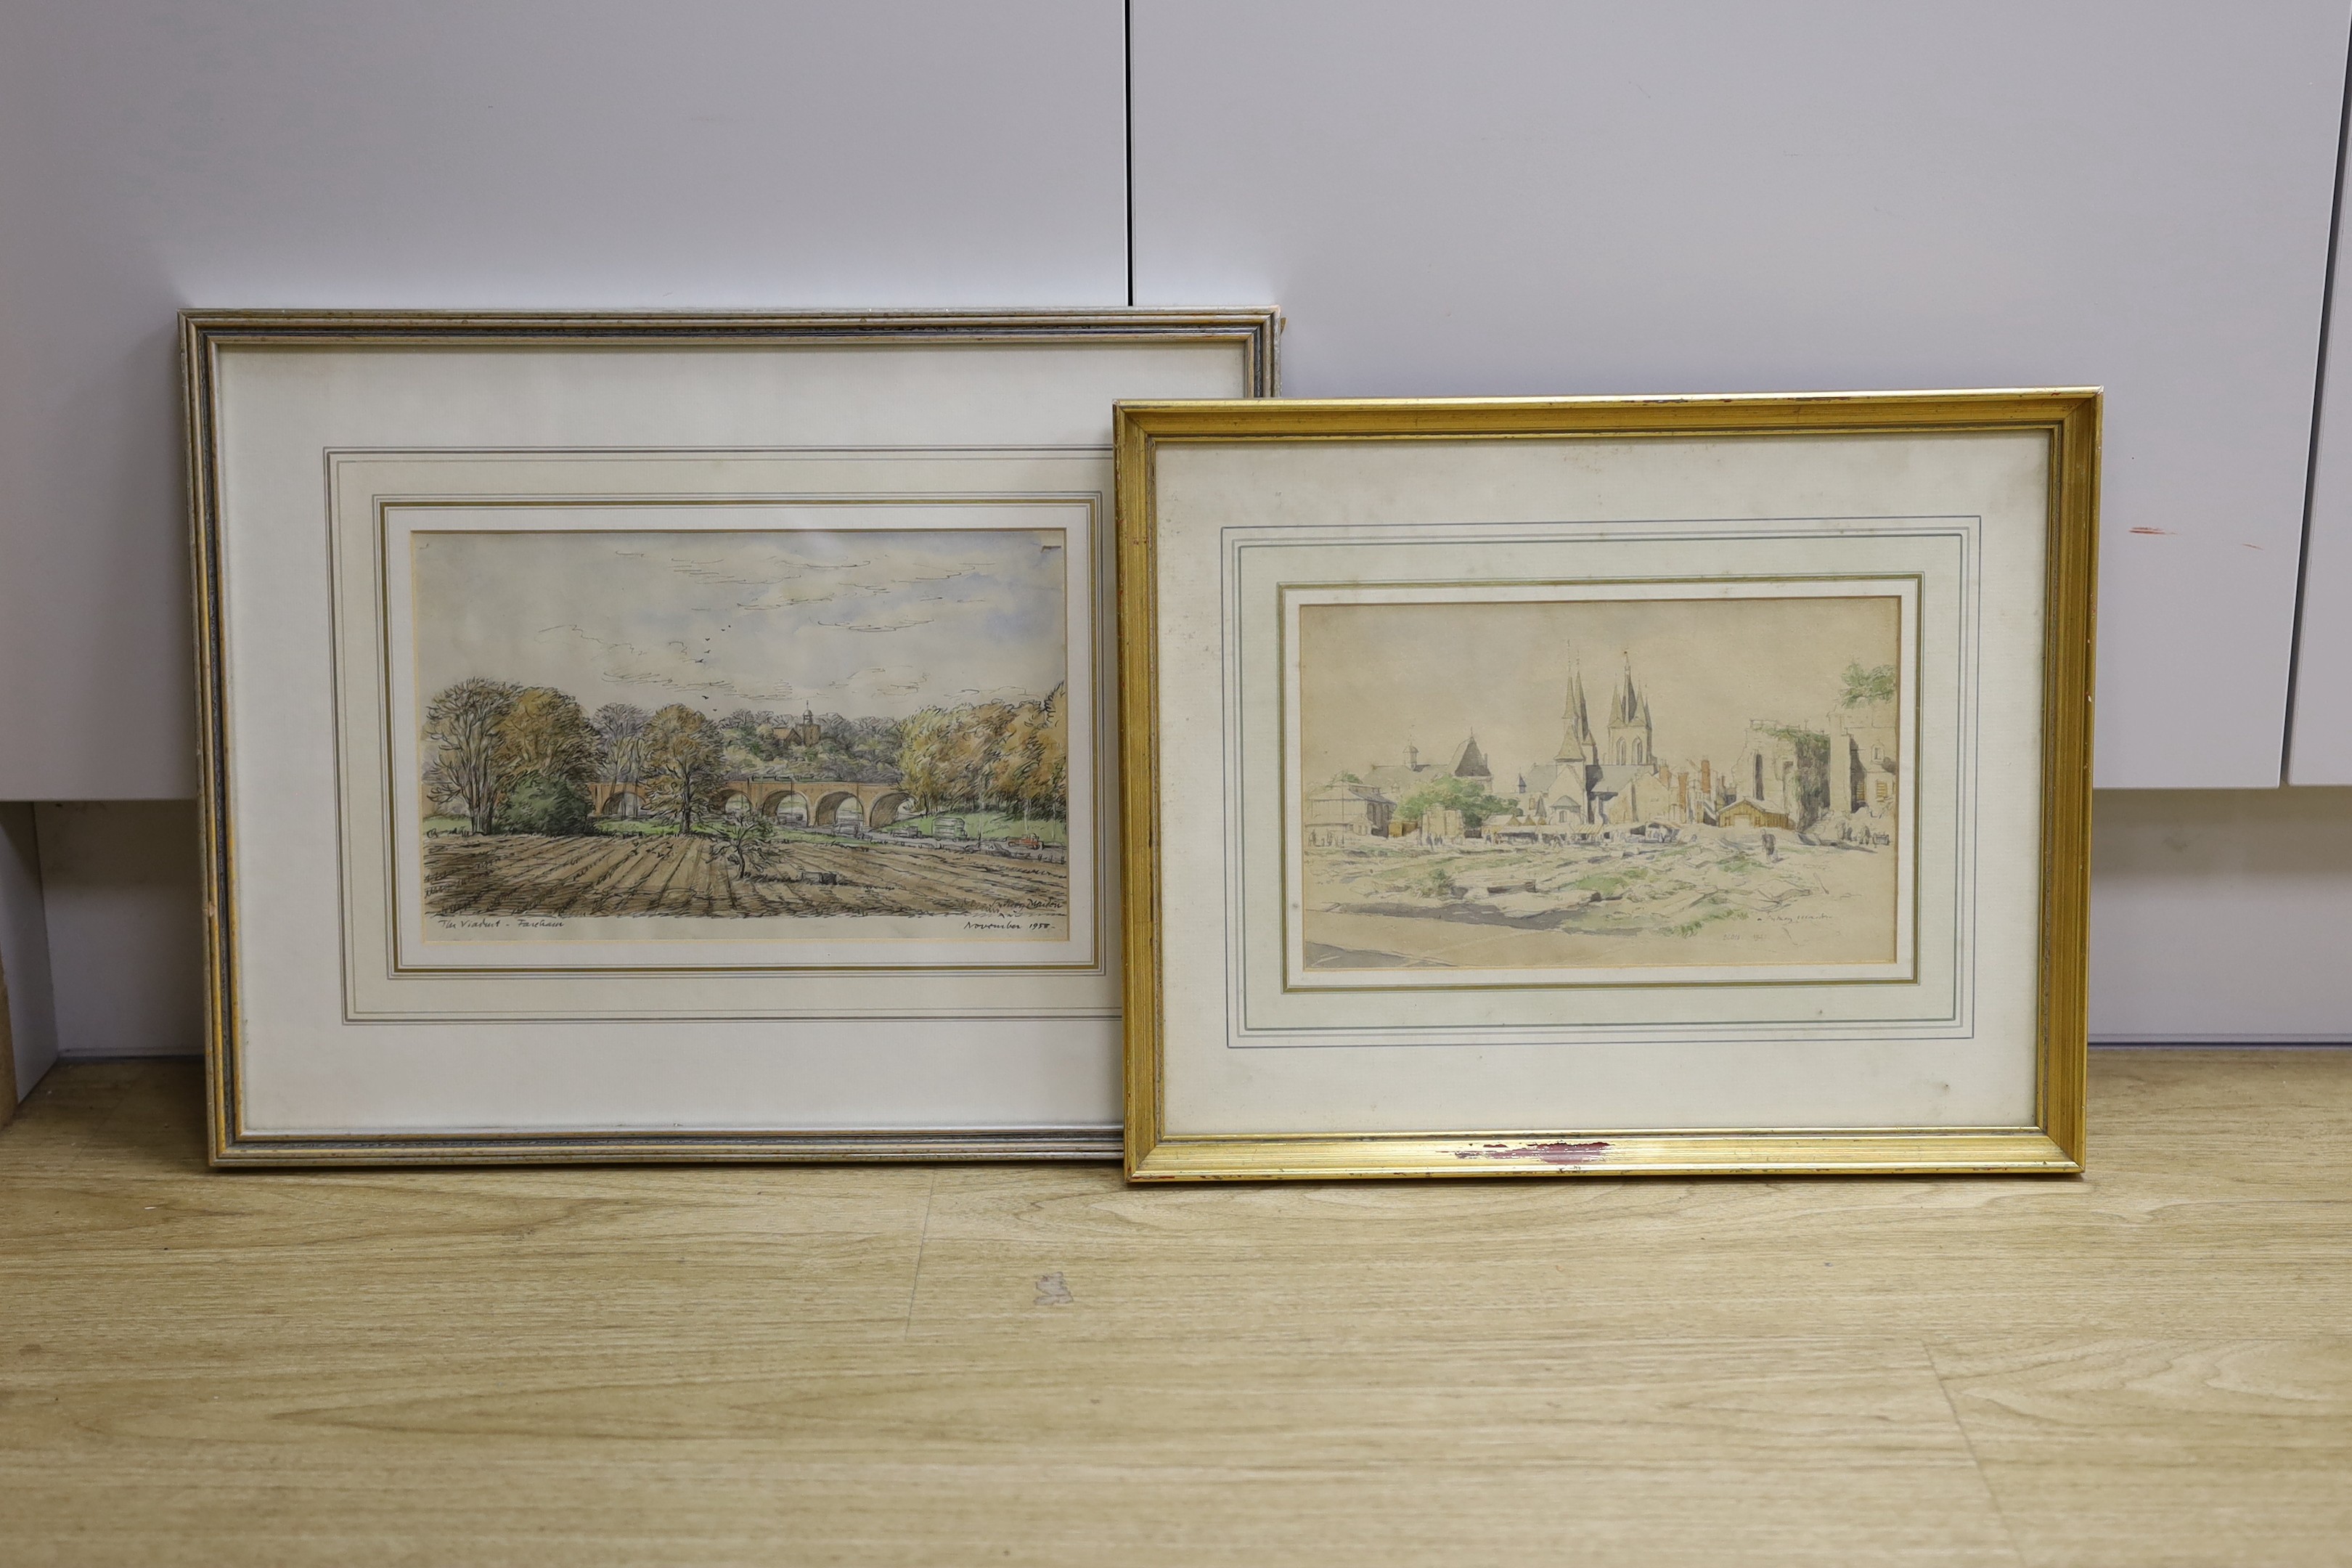 Sydney Maiden (1893-1963), two watercolours, 'The Viaduct, Fareham' and 'Blois', signed and dated 1958/1947, 17 x 27cm and 15 x 25cm